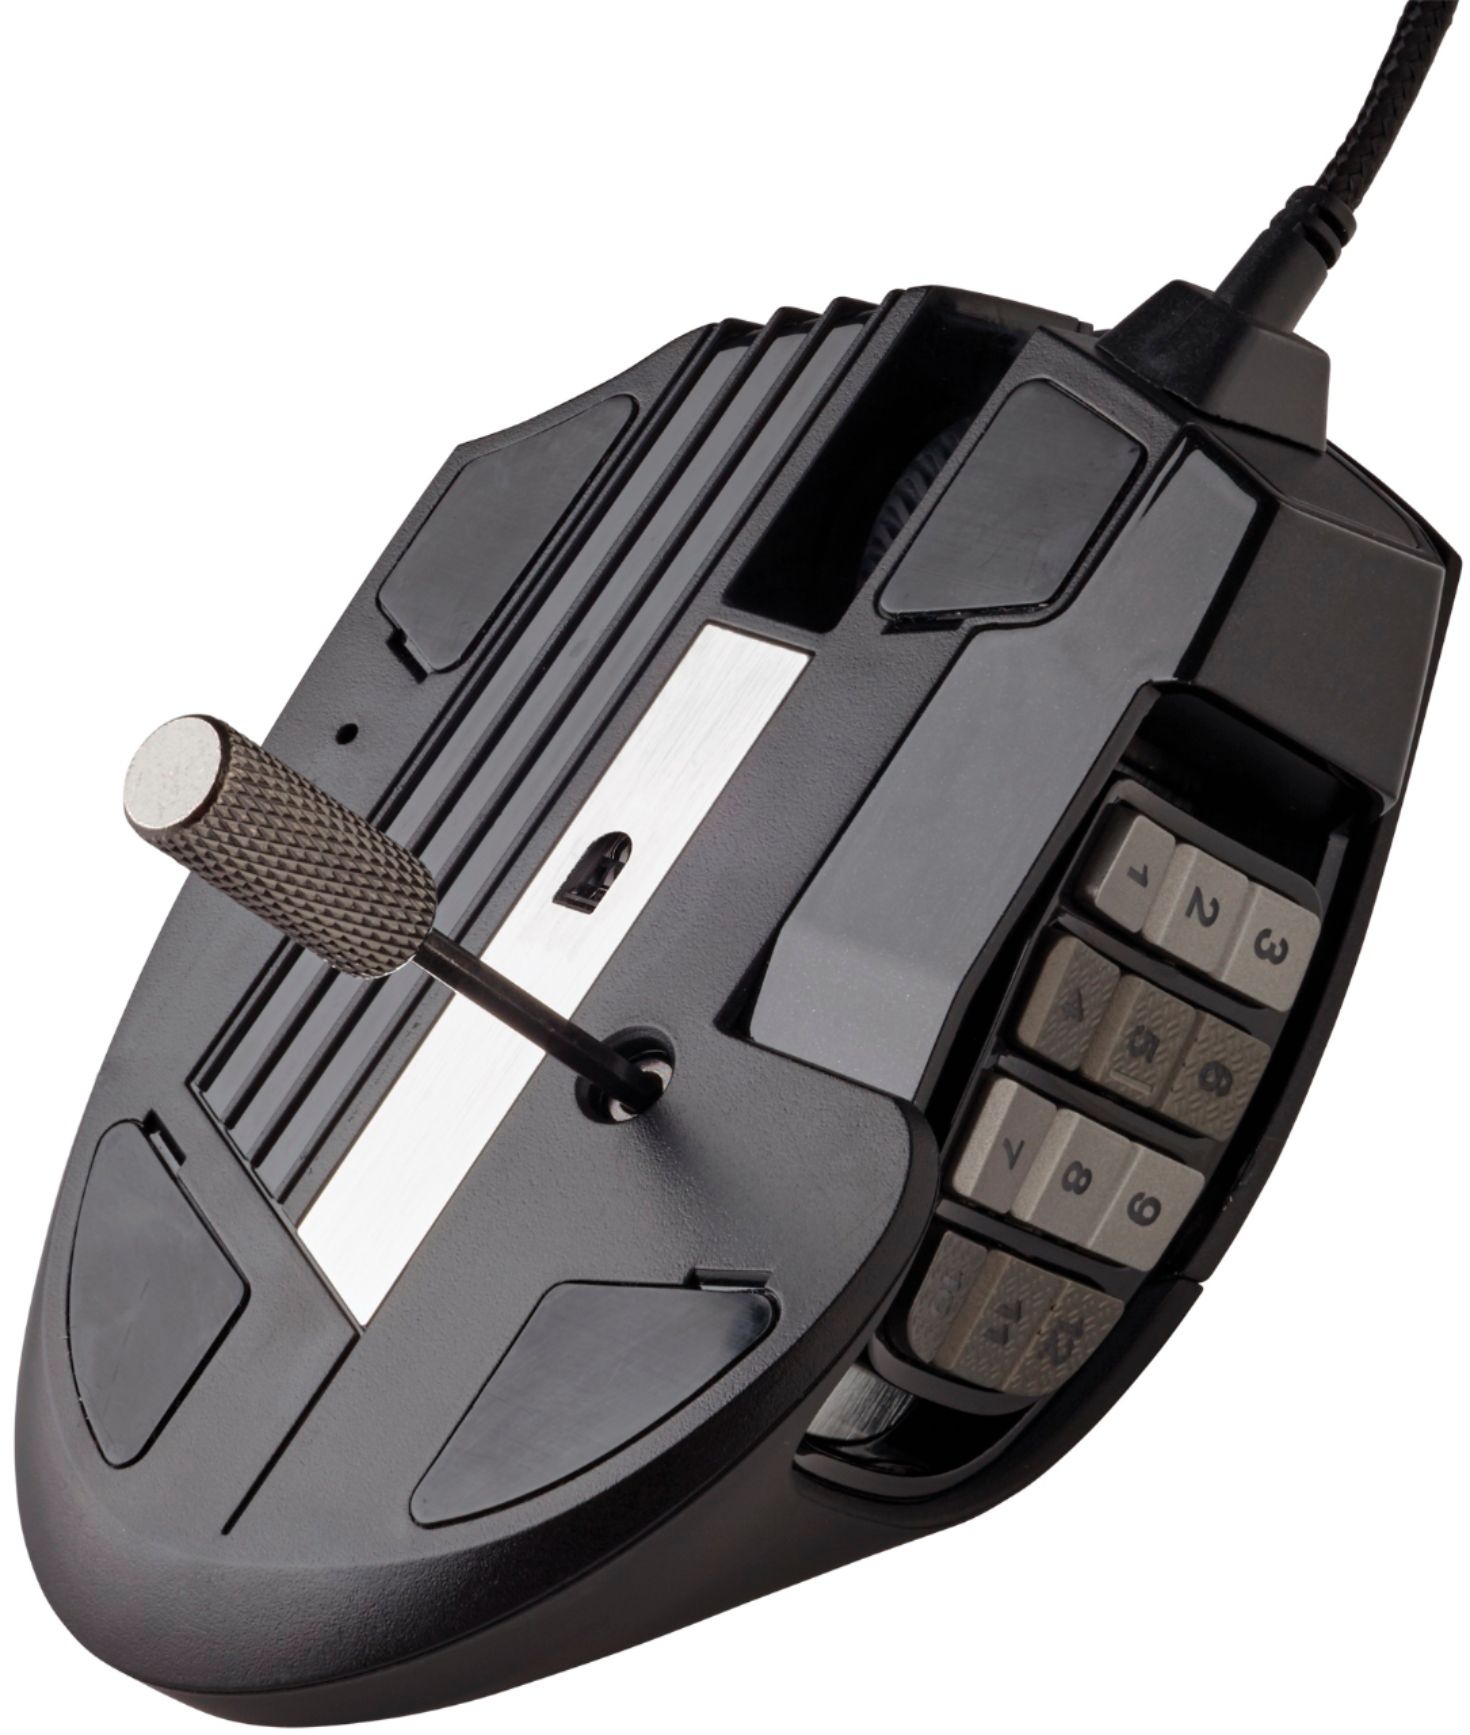 CORSAIR RGB Elite Wired Optical Gaming Mouse with 17 Programmable Buttons CH-9304211-NA Best Buy